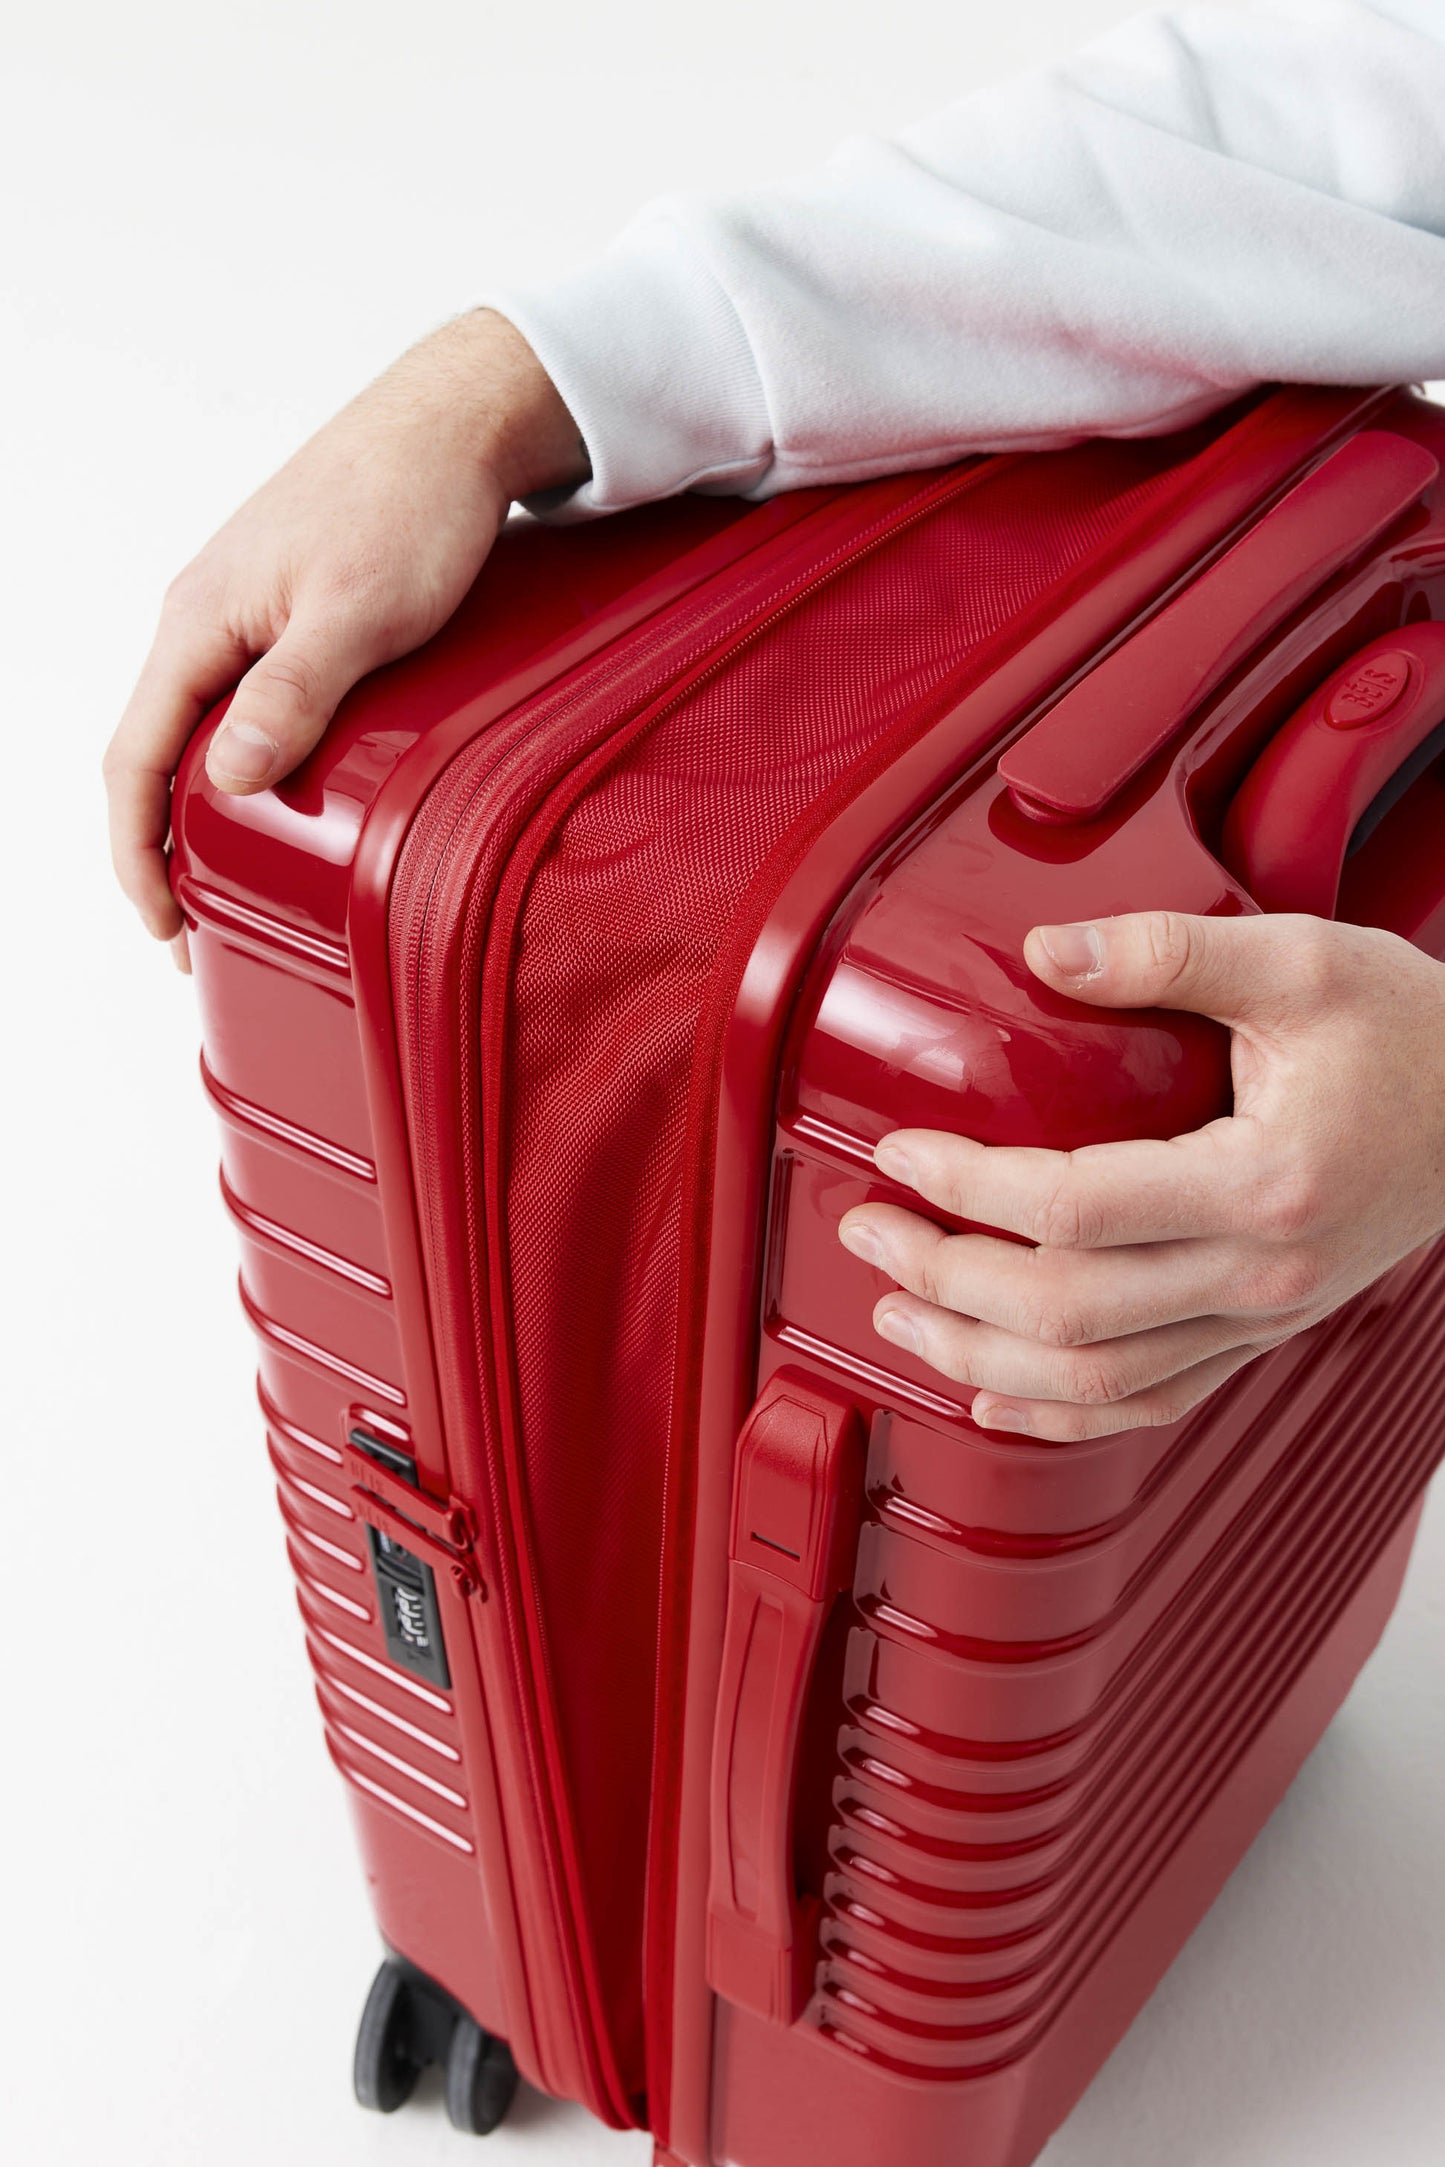 The Carry-On Roller in Text Me Red